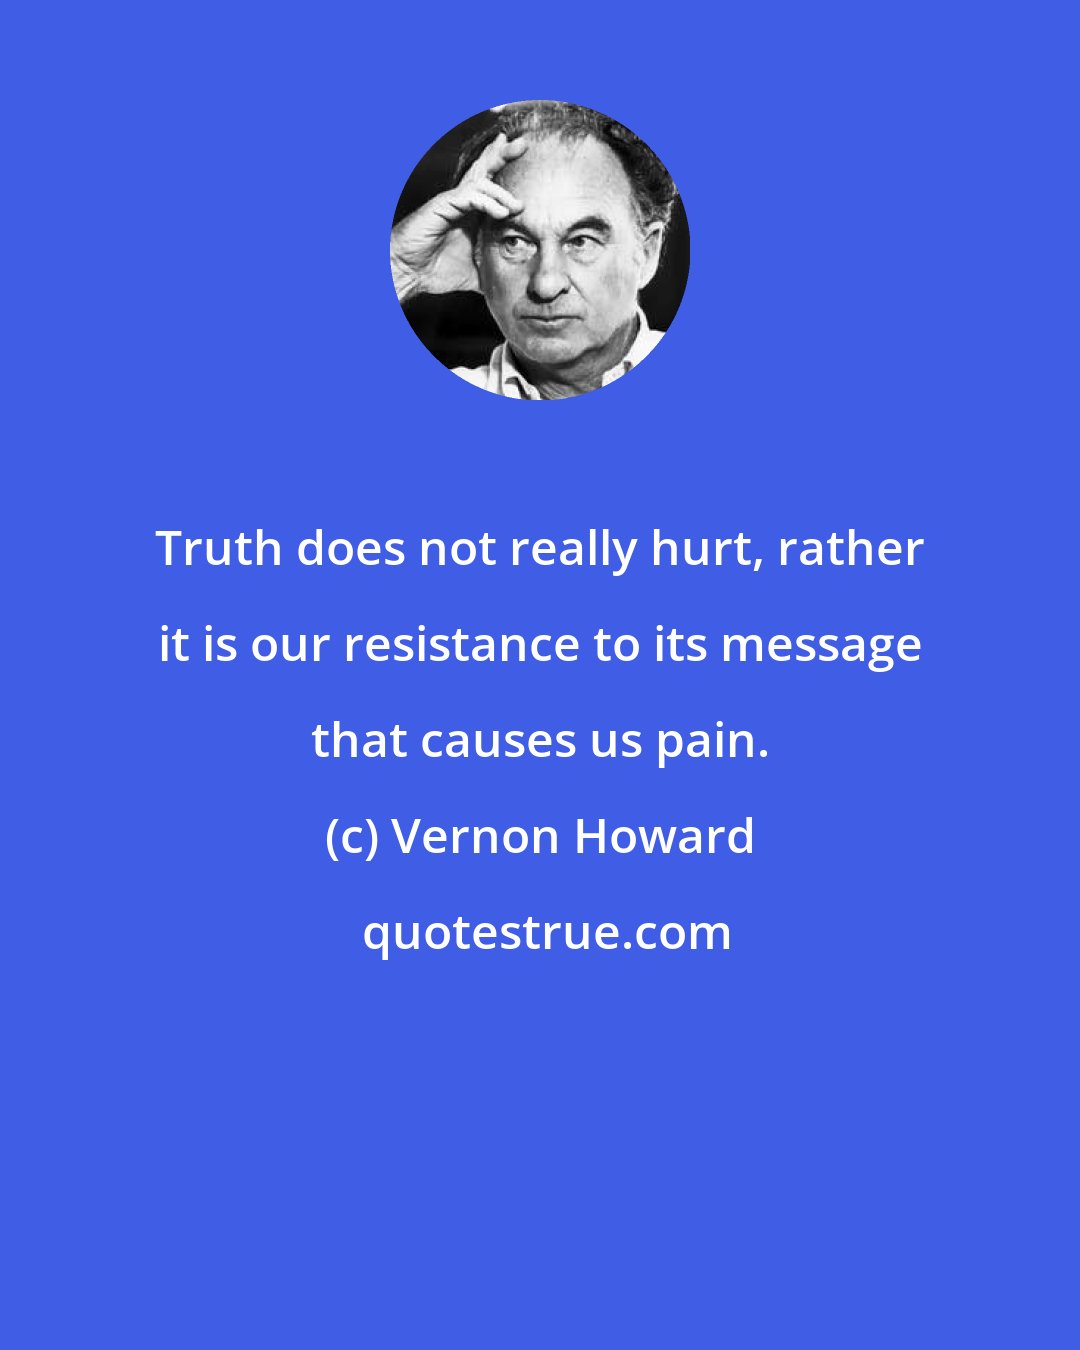 Vernon Howard: Truth does not really hurt, rather it is our resistance to its message that causes us pain.